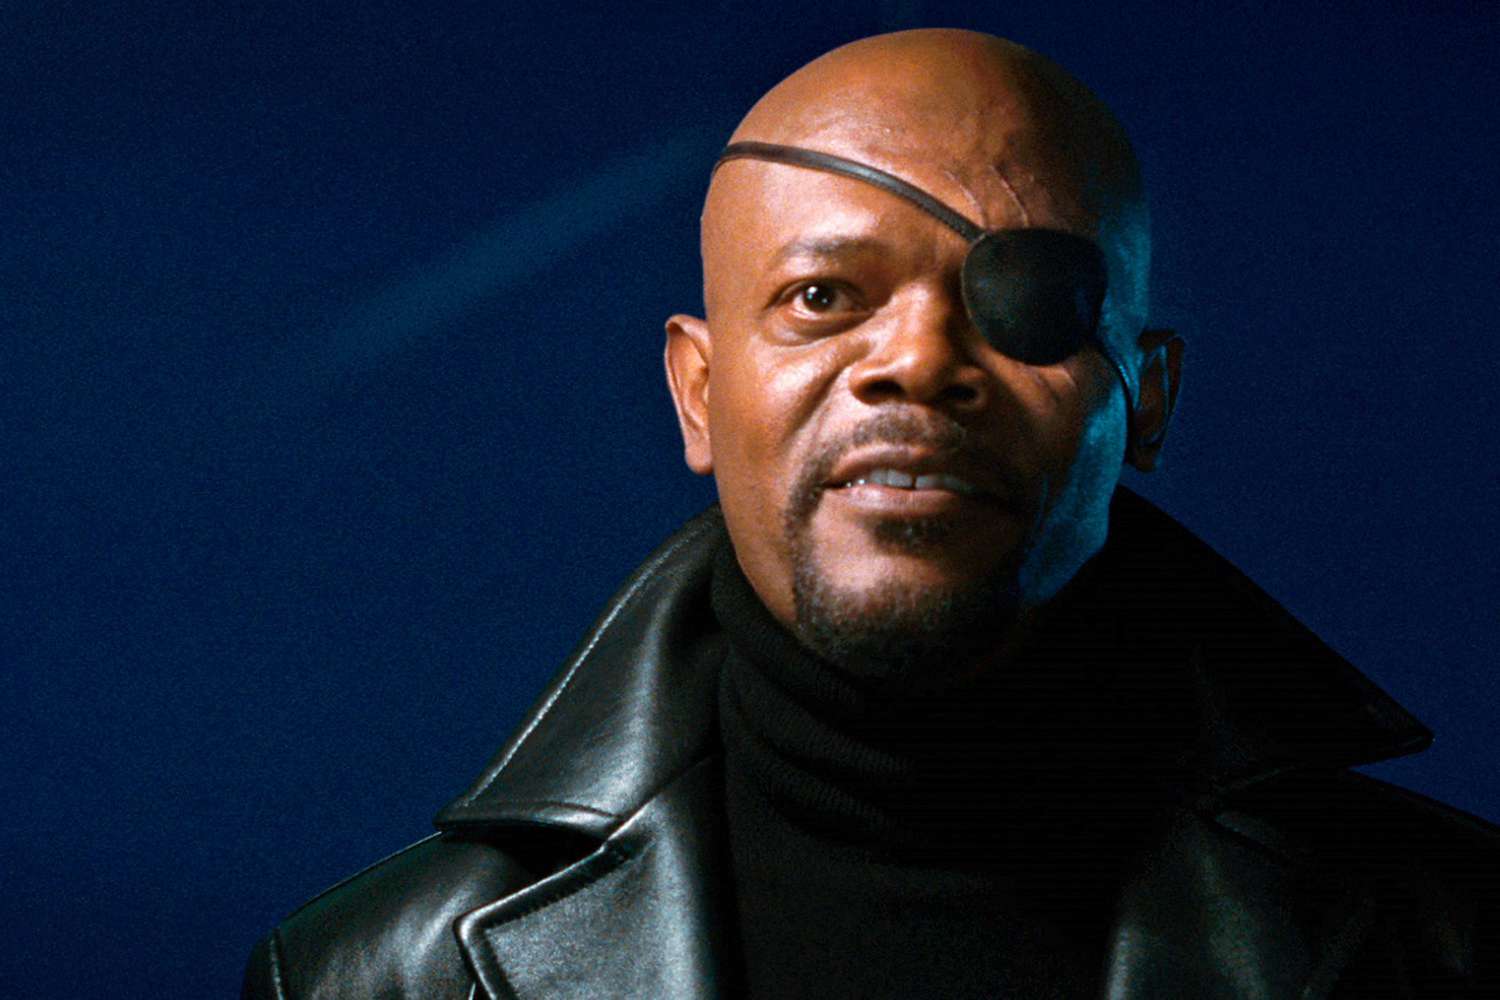 Samuel L. Jackson makes a bold introduction in never-before-seen 'Iron Man' end-credits outtake